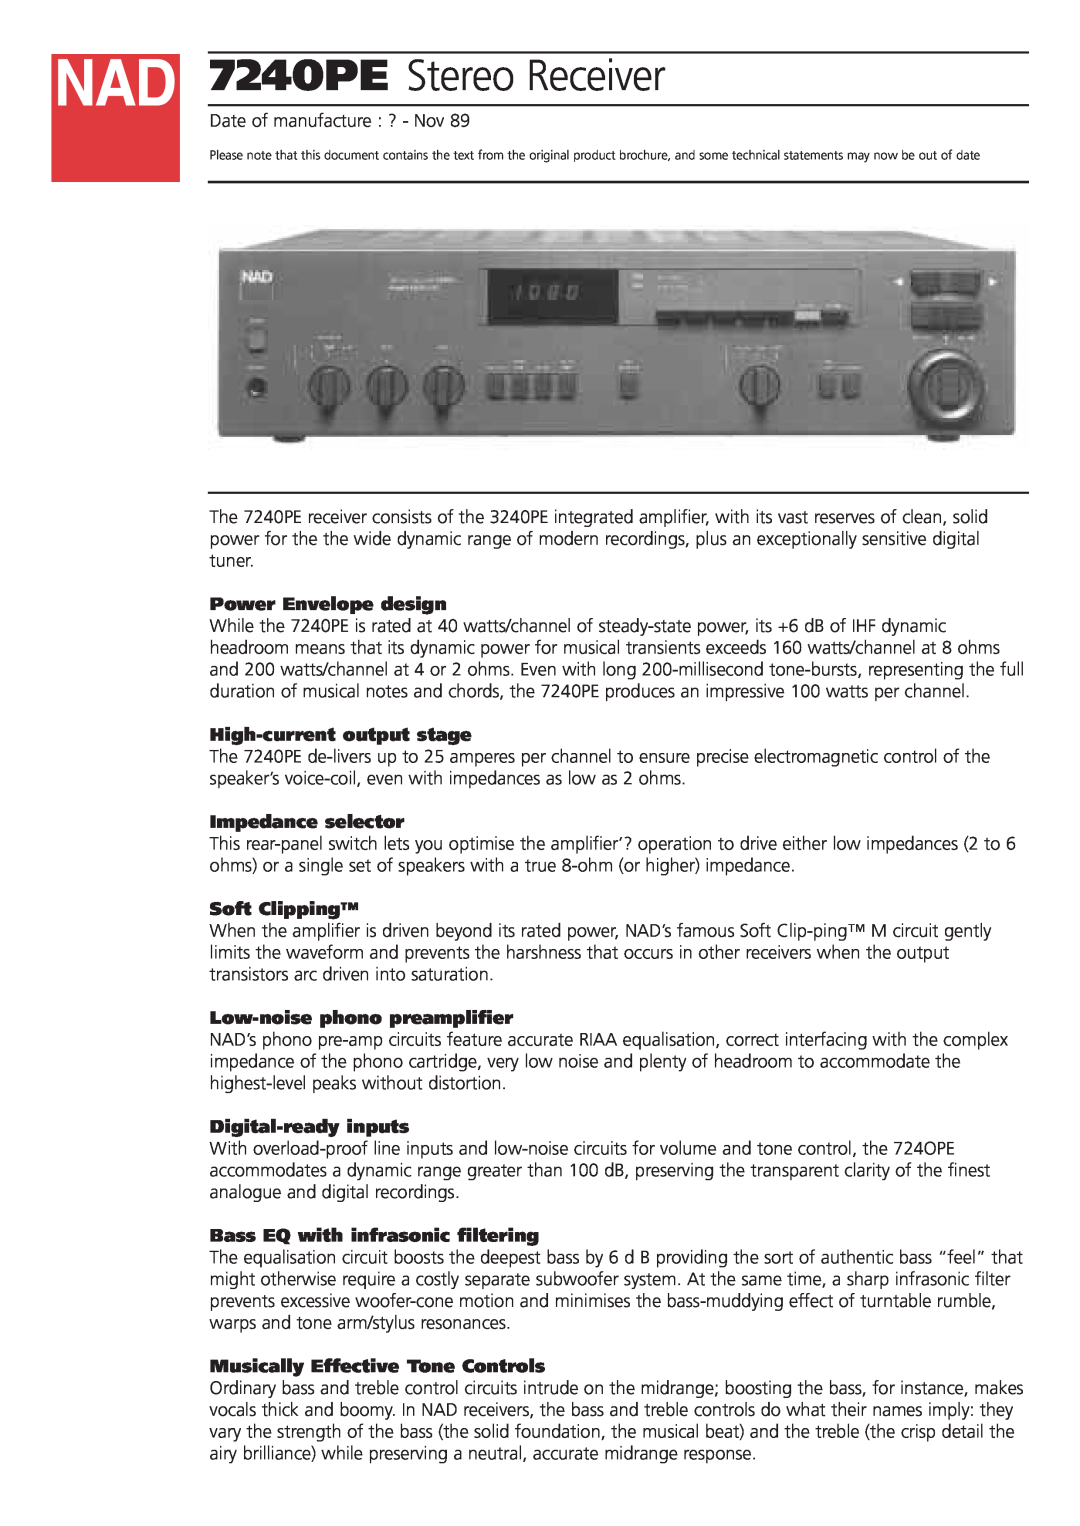 NAD 7240PE brochure Power Envelope design, High-currentoutput stage, Impedance selector, Soft Clipping 